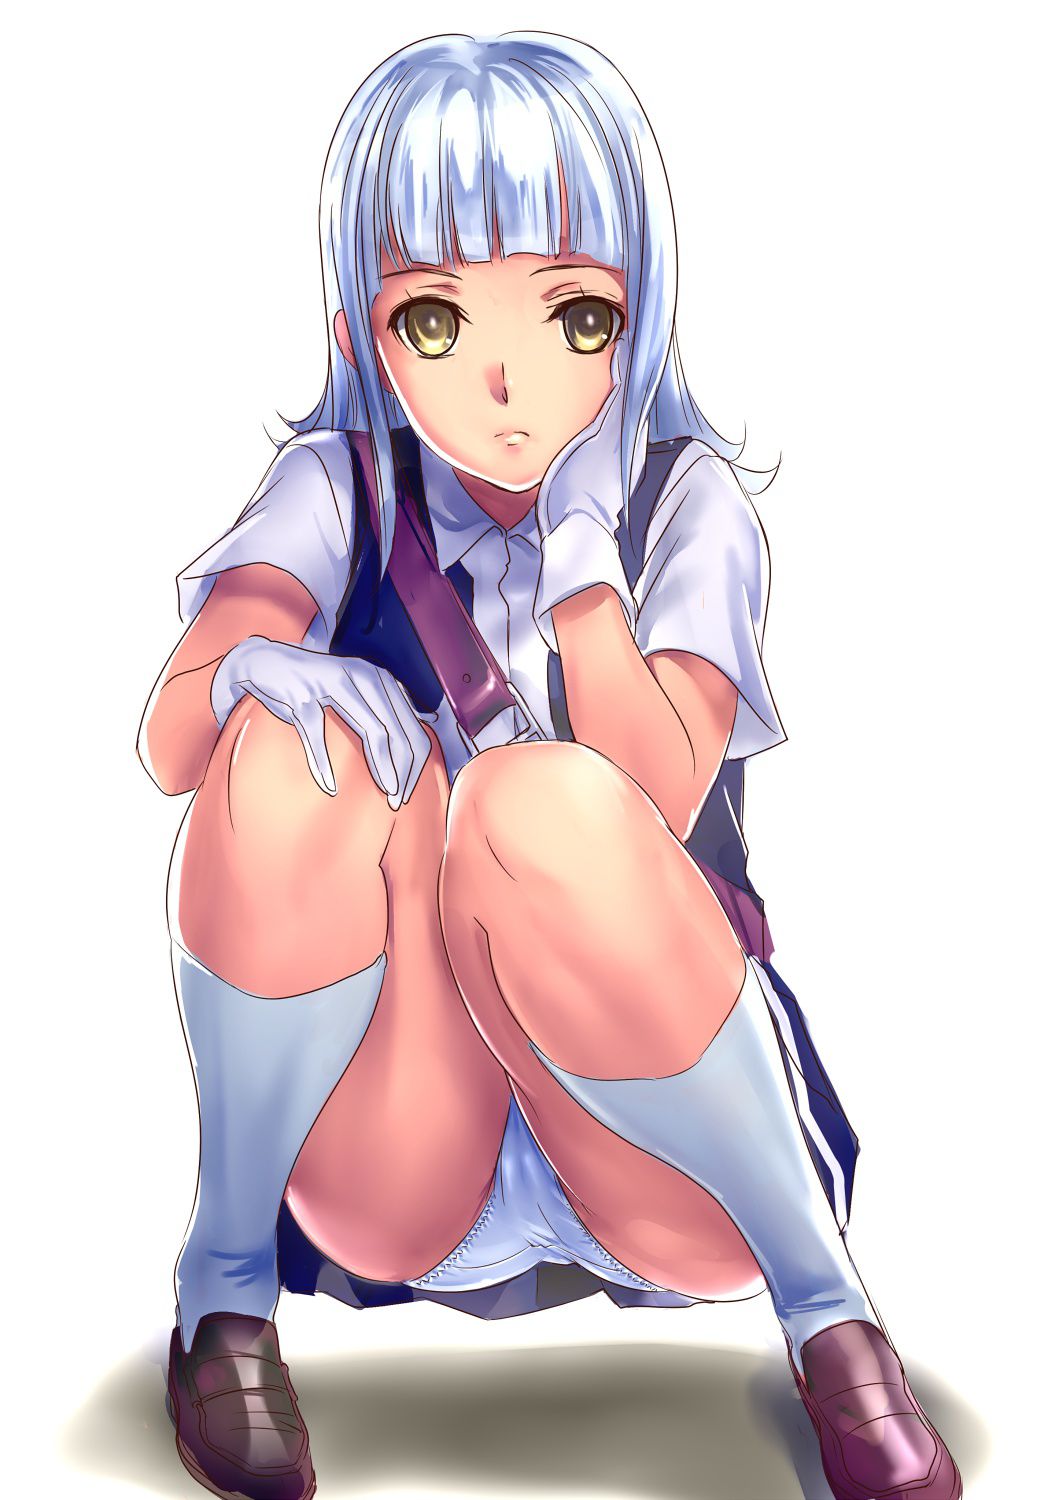 Picture of a girl squatting in a crouching skirt part 3 4